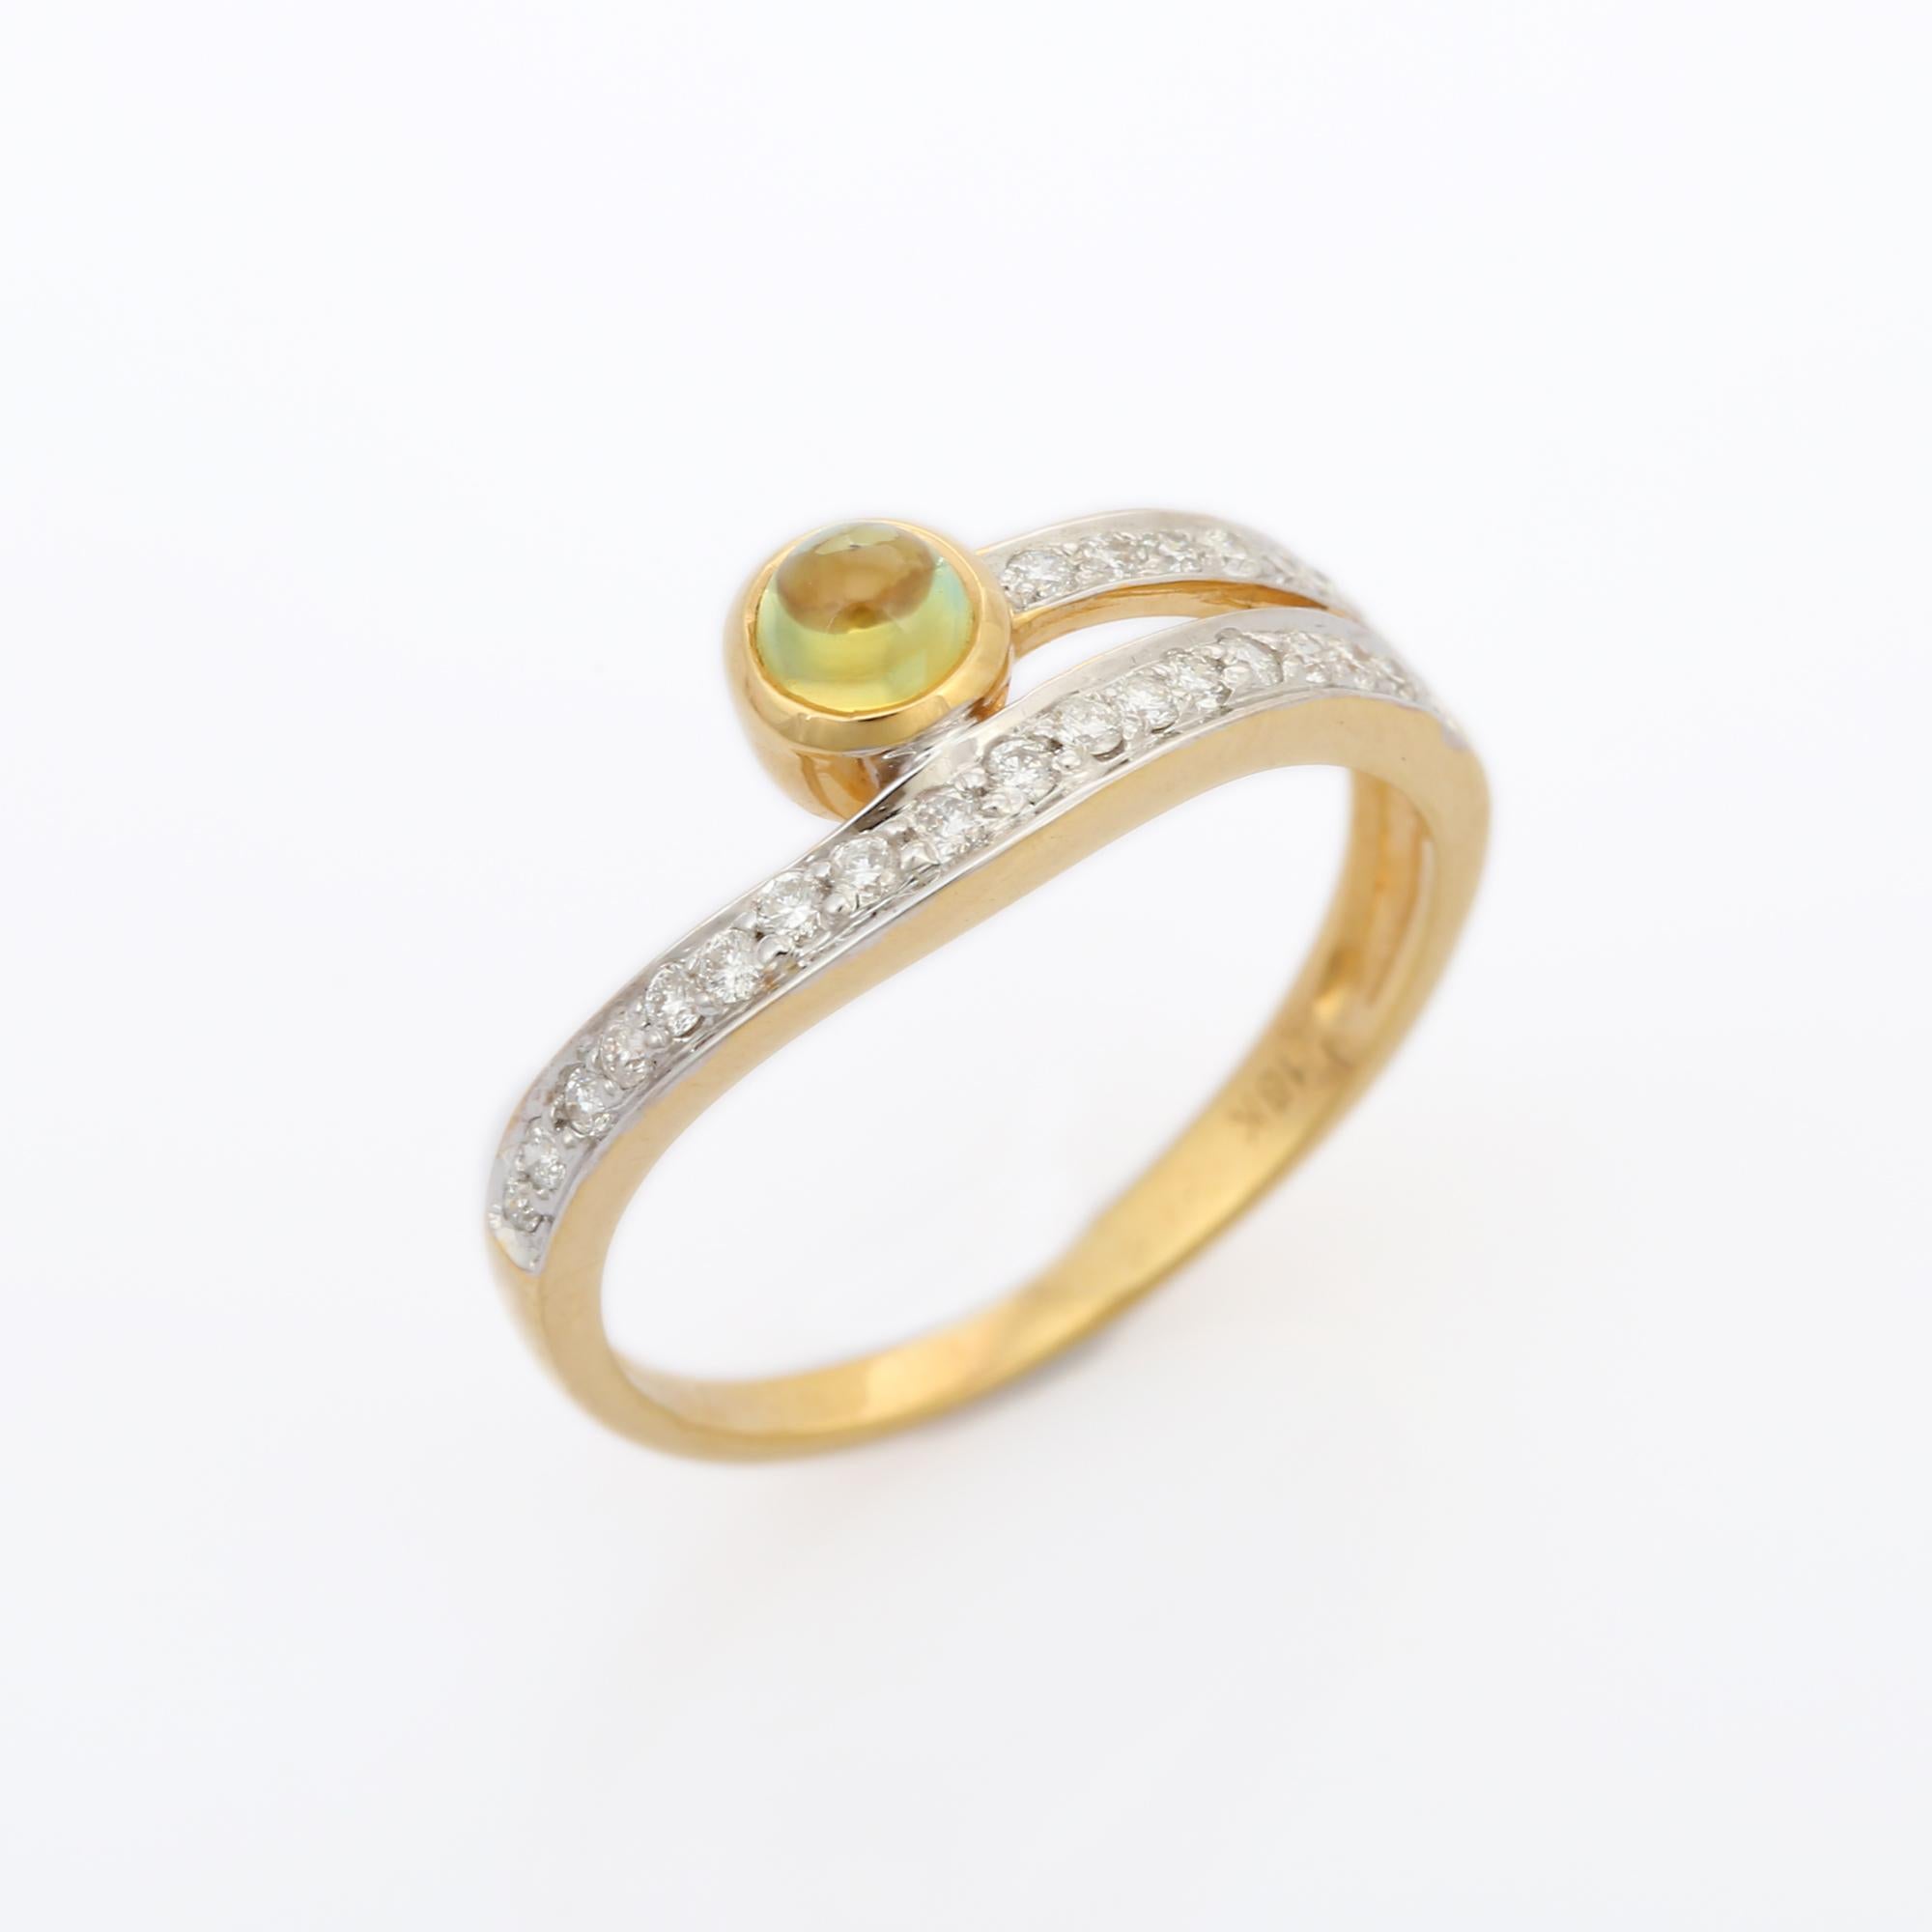 For Sale:  Diamond and Yellow Sapphire Stackable Band Ring in 18k Solid Yellow Gold 2